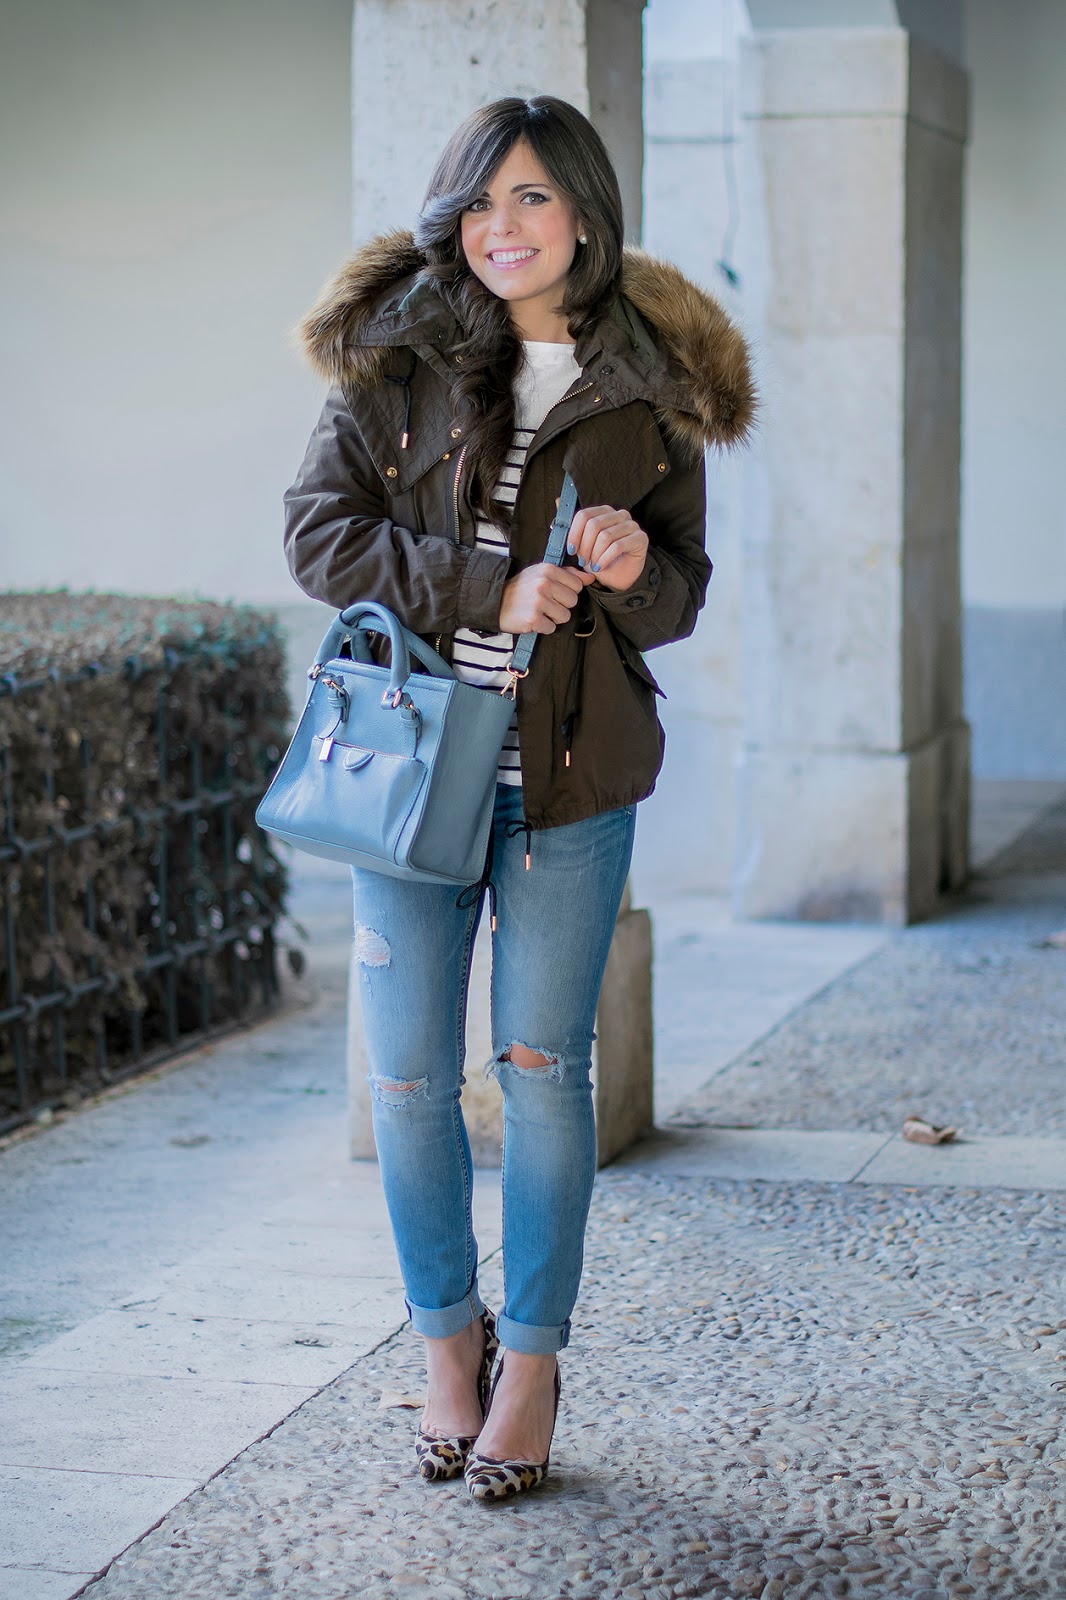 15 Amazing Ways to Wear Parka This Winter